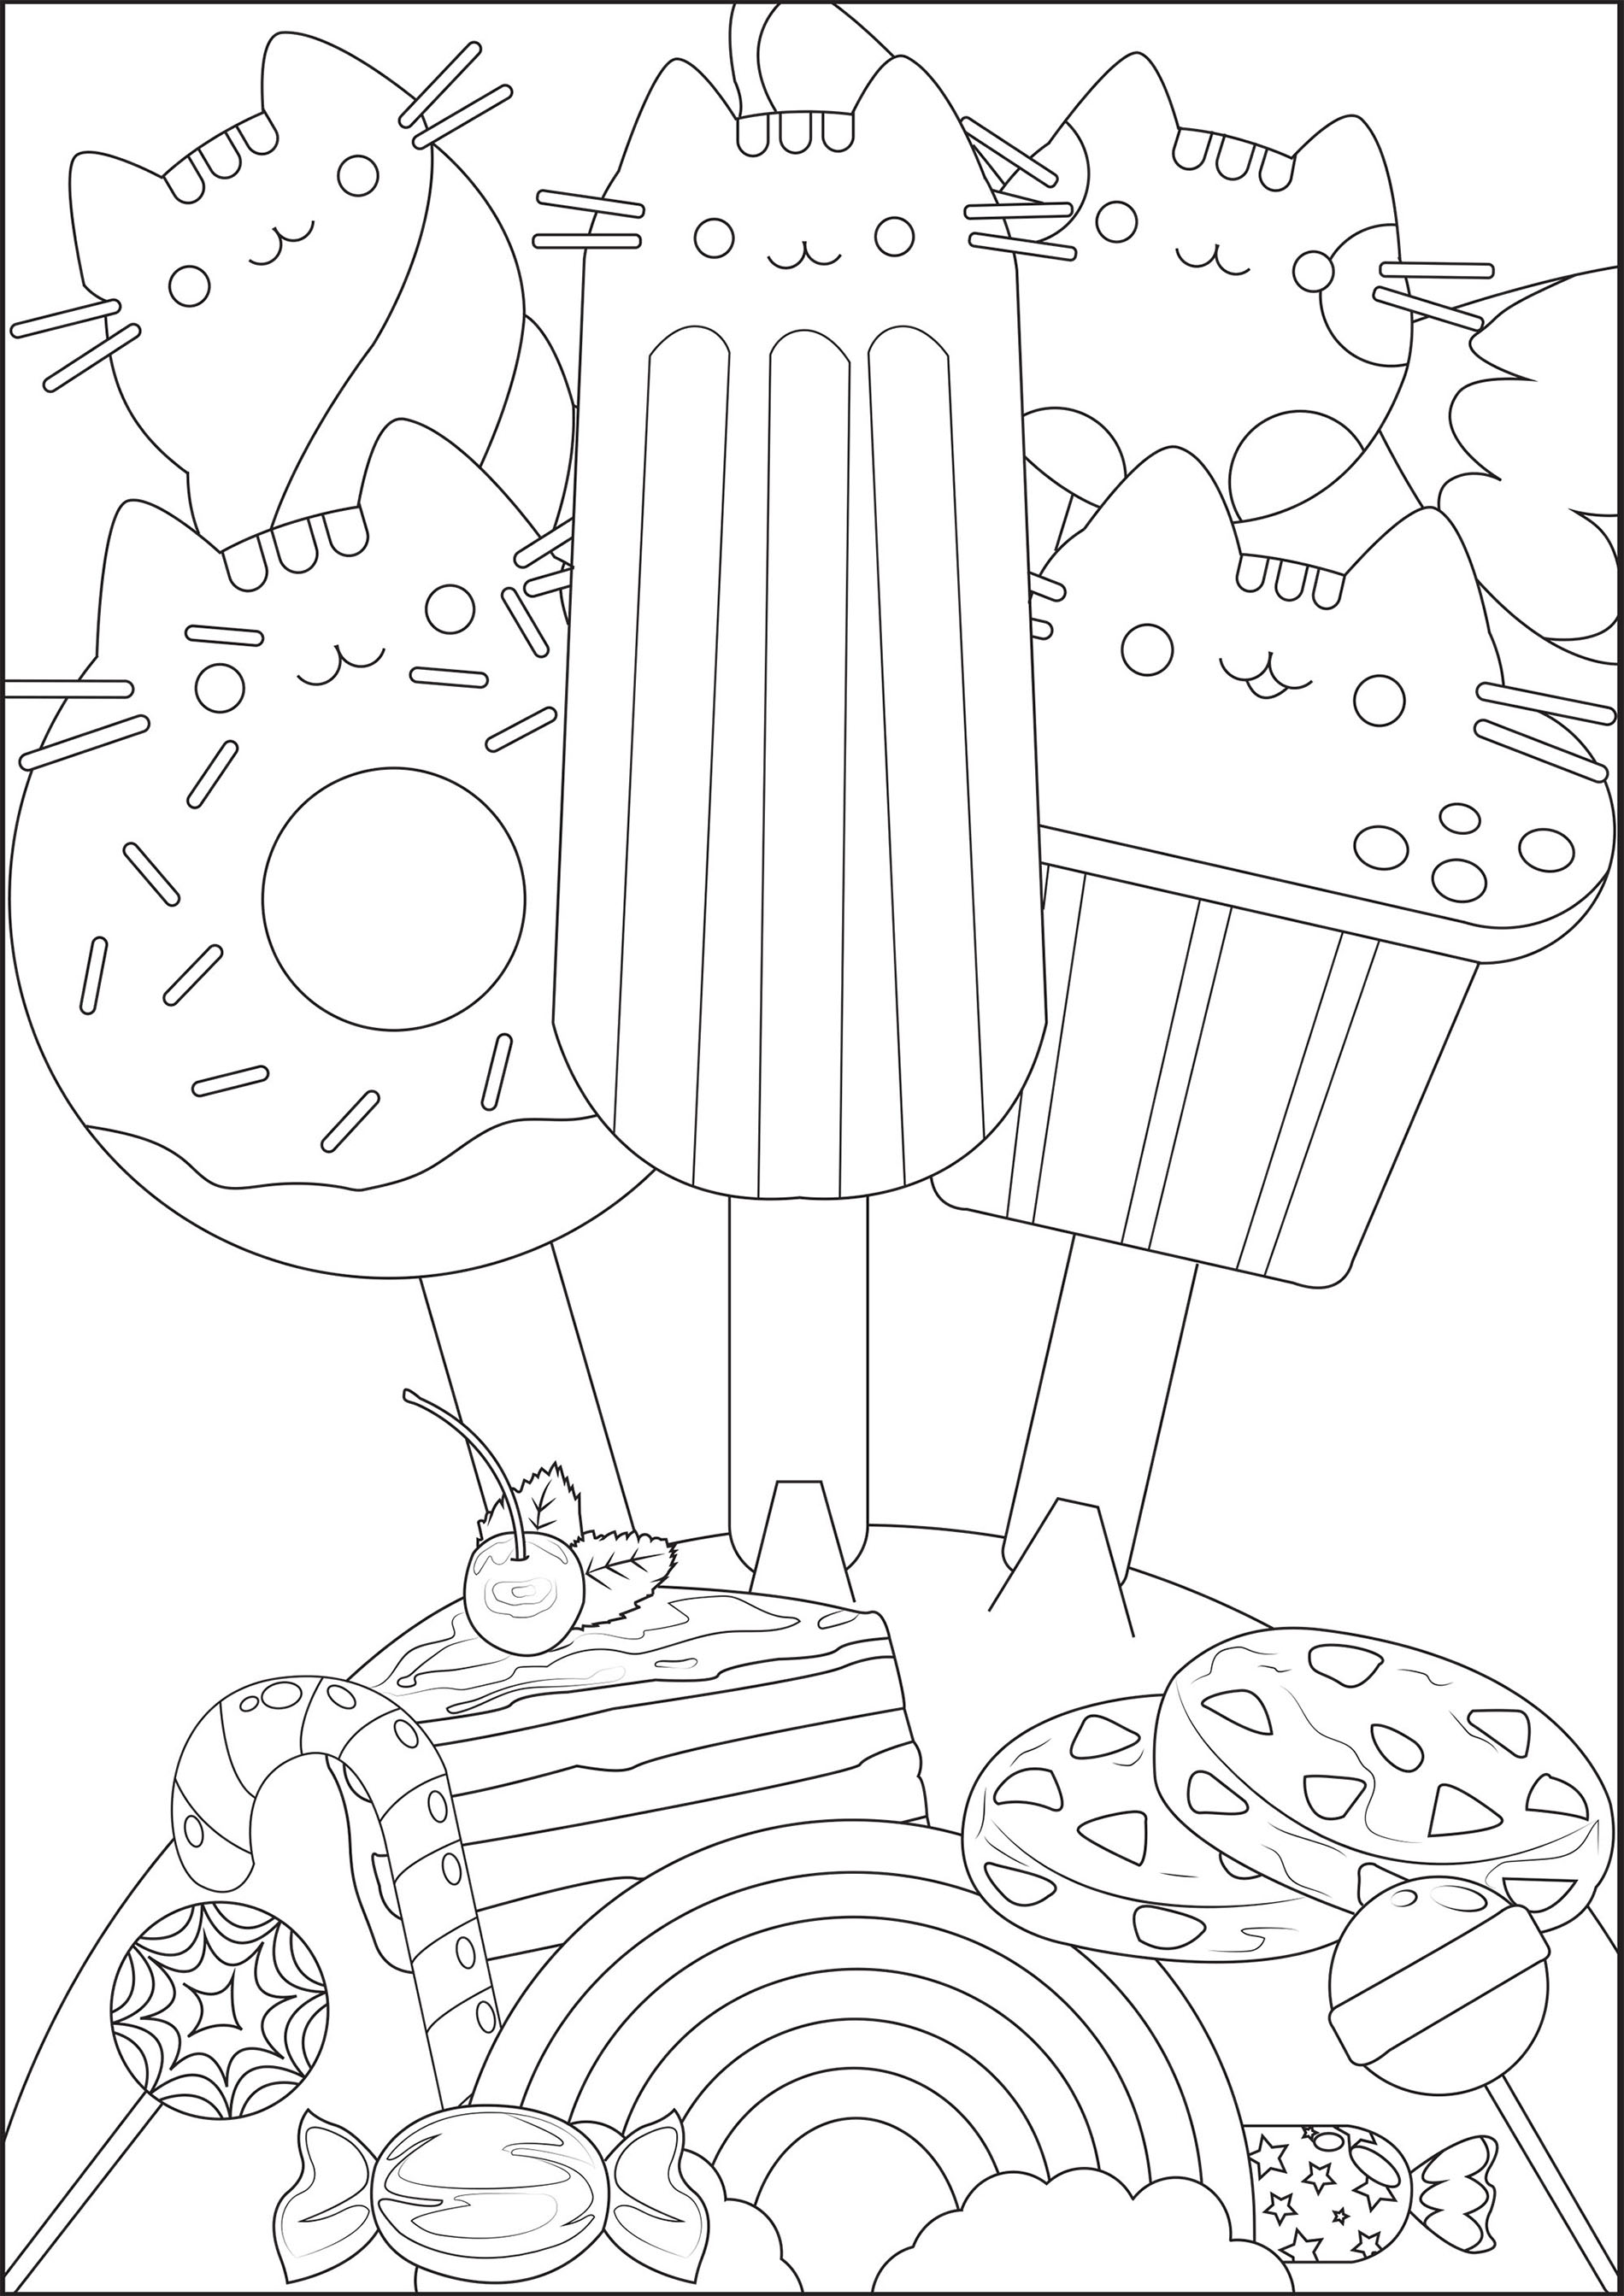 Free Pusheen coloring page to print and color